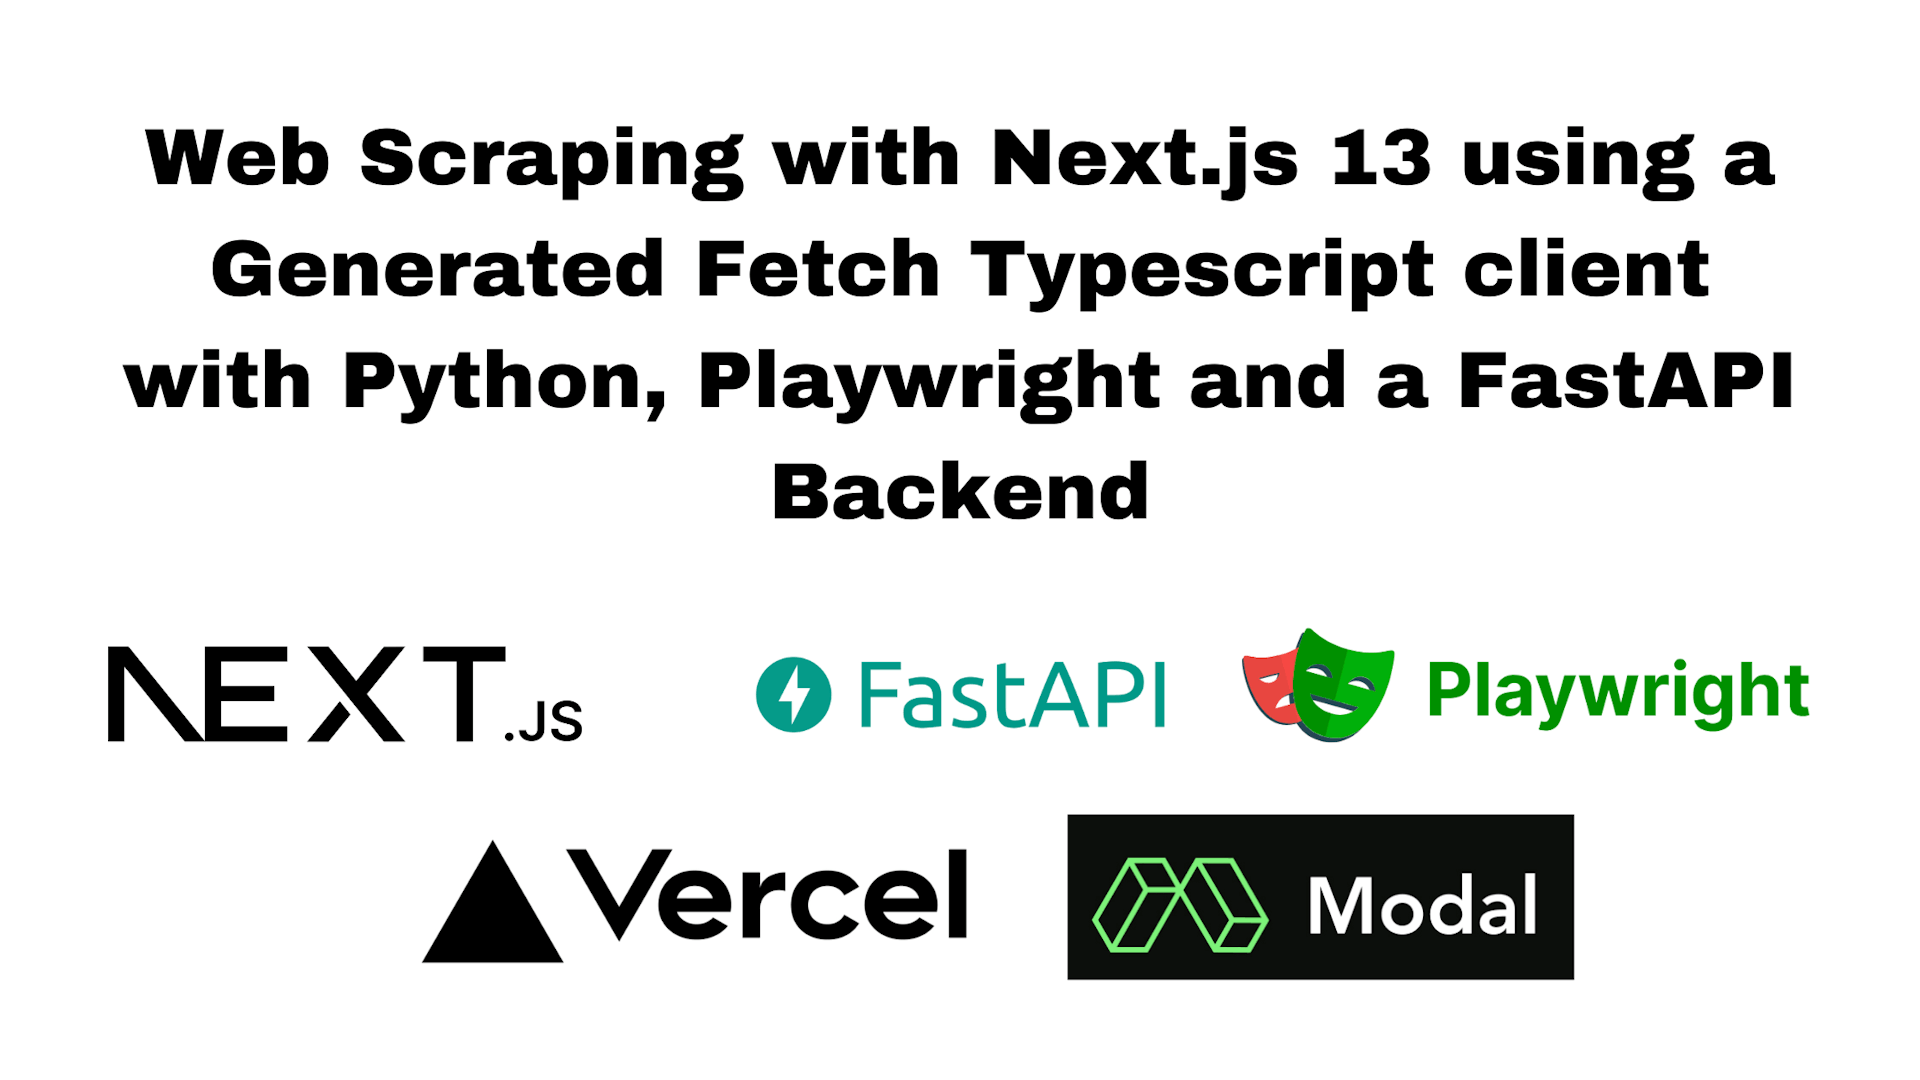 Web Scraping with Next.js 13 using a Generated Fetch Typescript client with Python, Playwright and a FastAPI Backend